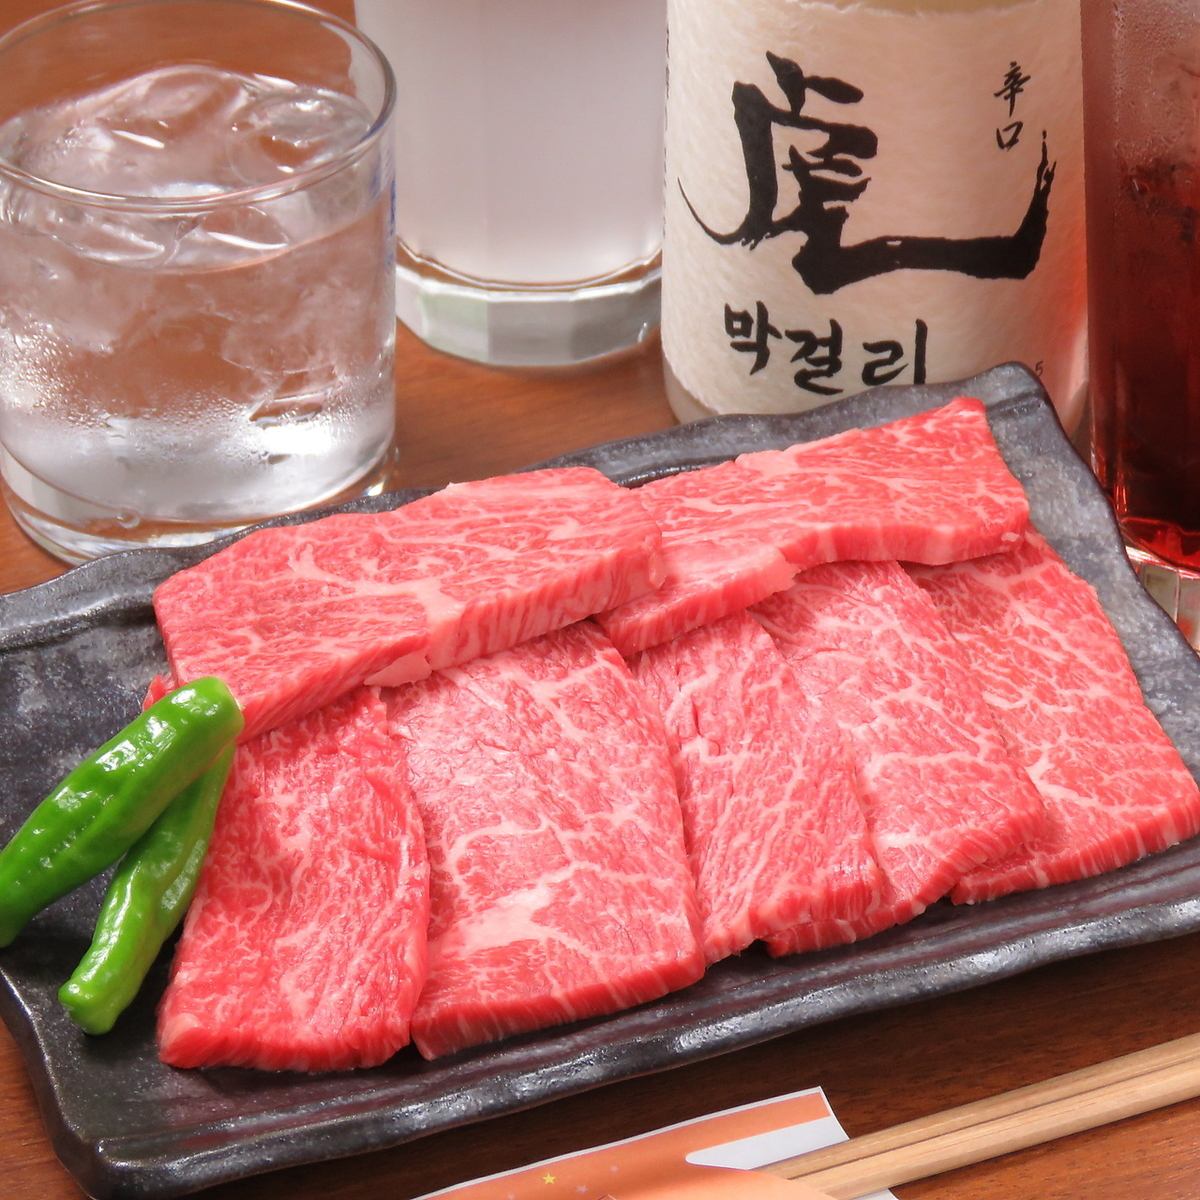 [For drinking parties and banquets] Offering high-quality meat at a reasonable price ◎